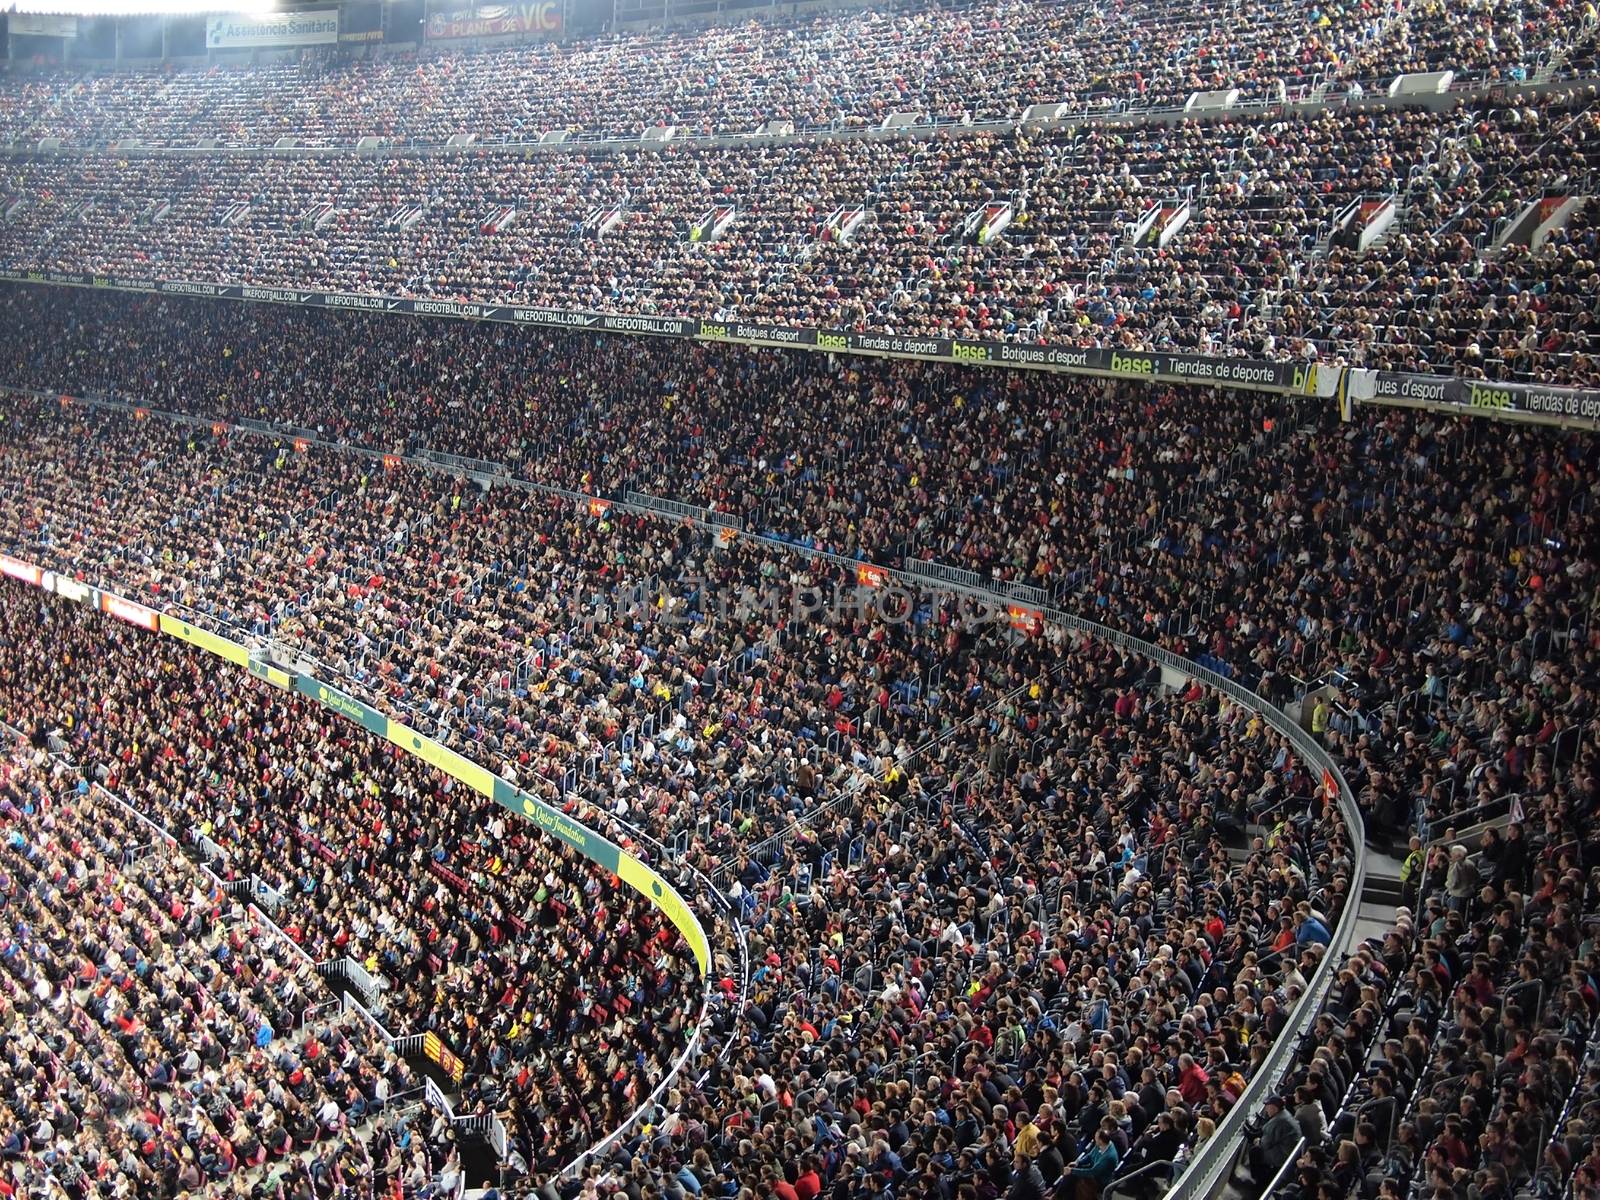 Barcelona, Spain – October 22, 2011: Spectators in a sold out Barcelona football stadium Camp Nou during the match between FC Barcelona and FC Sevilla on October 22, 2011.